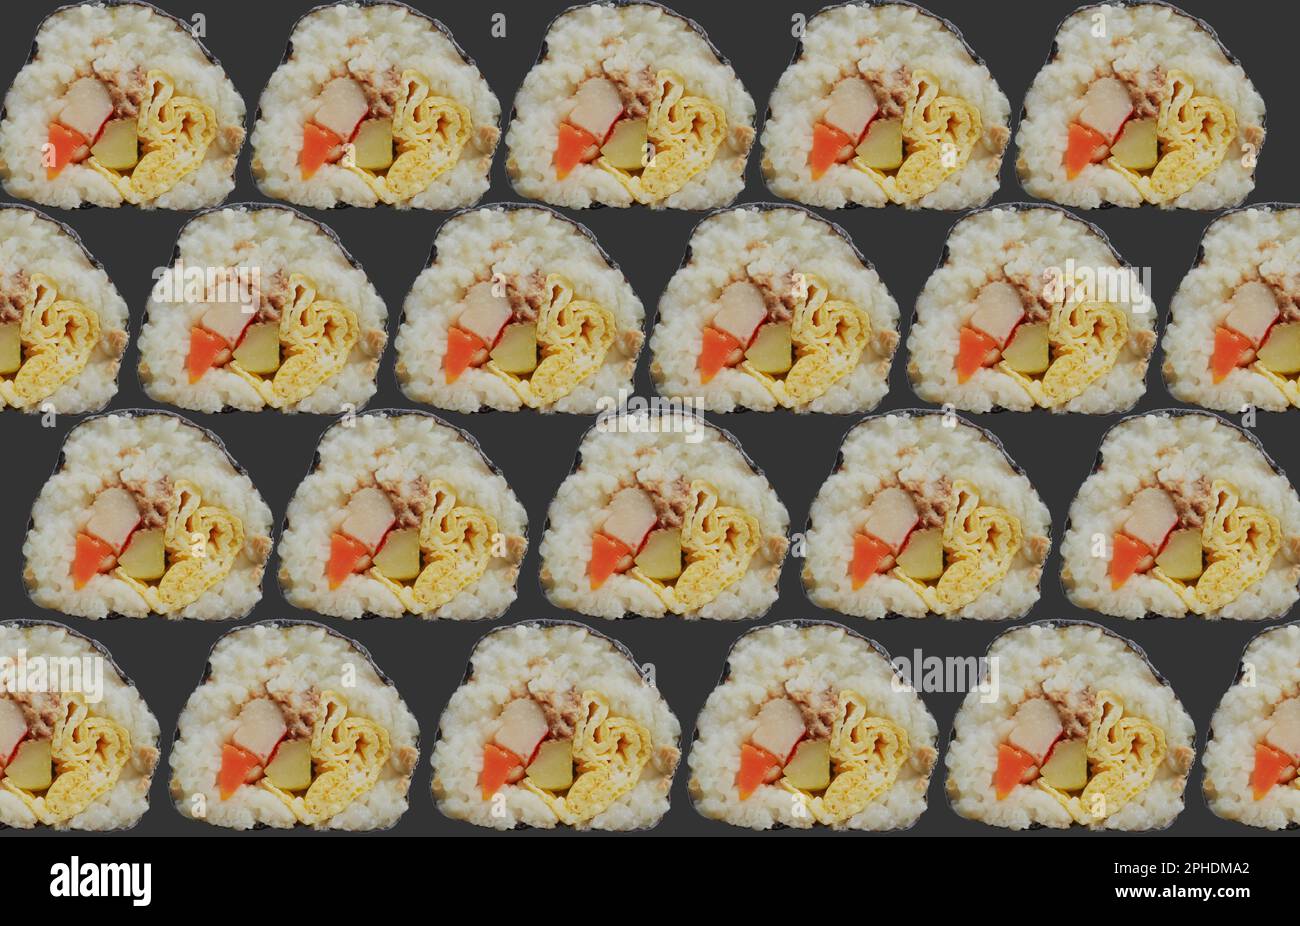 background kimbap or gimbap is Korean roll Gimbap(kimbob) made from steamed white rice (bap) and various other ingredients. Stock Photo